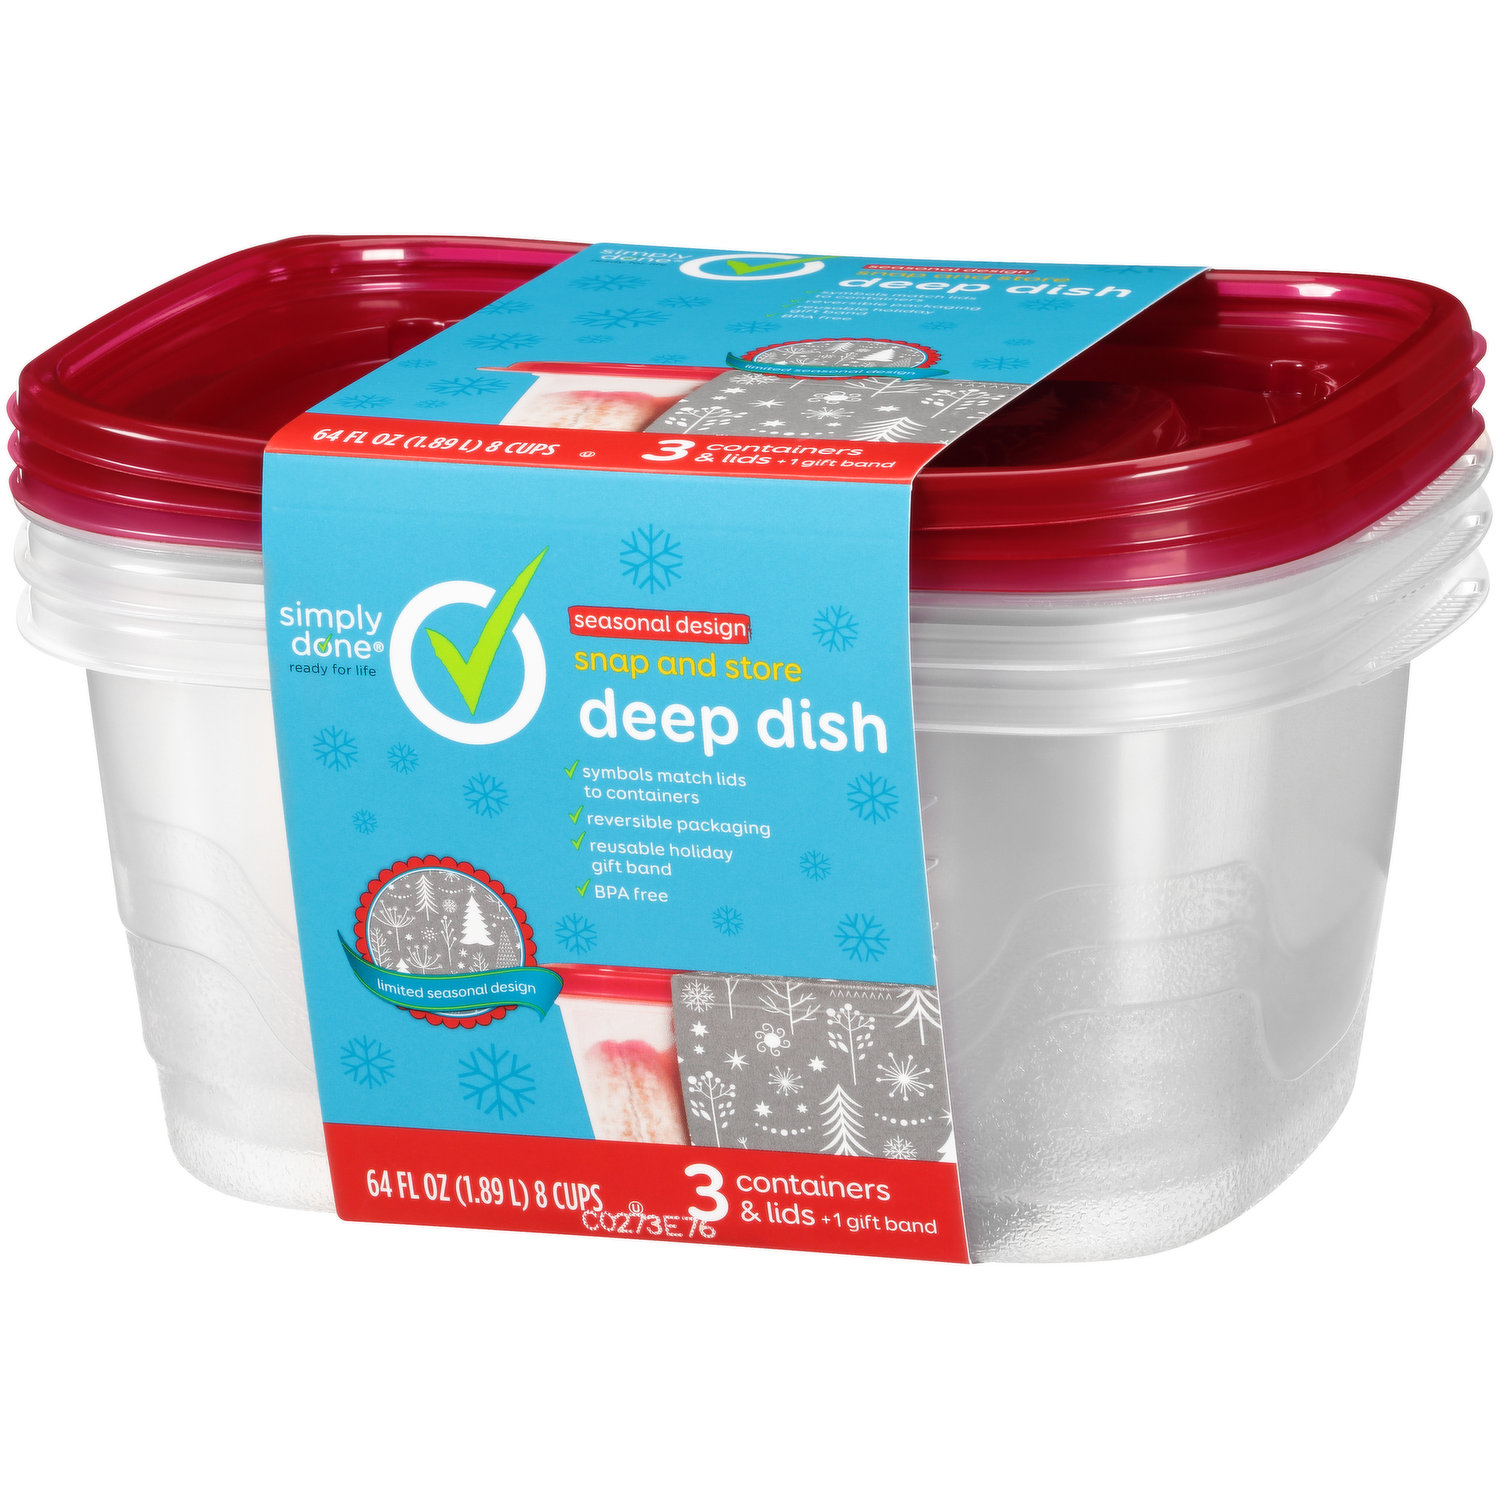 Simply Done Durable Small Square Container & Lid